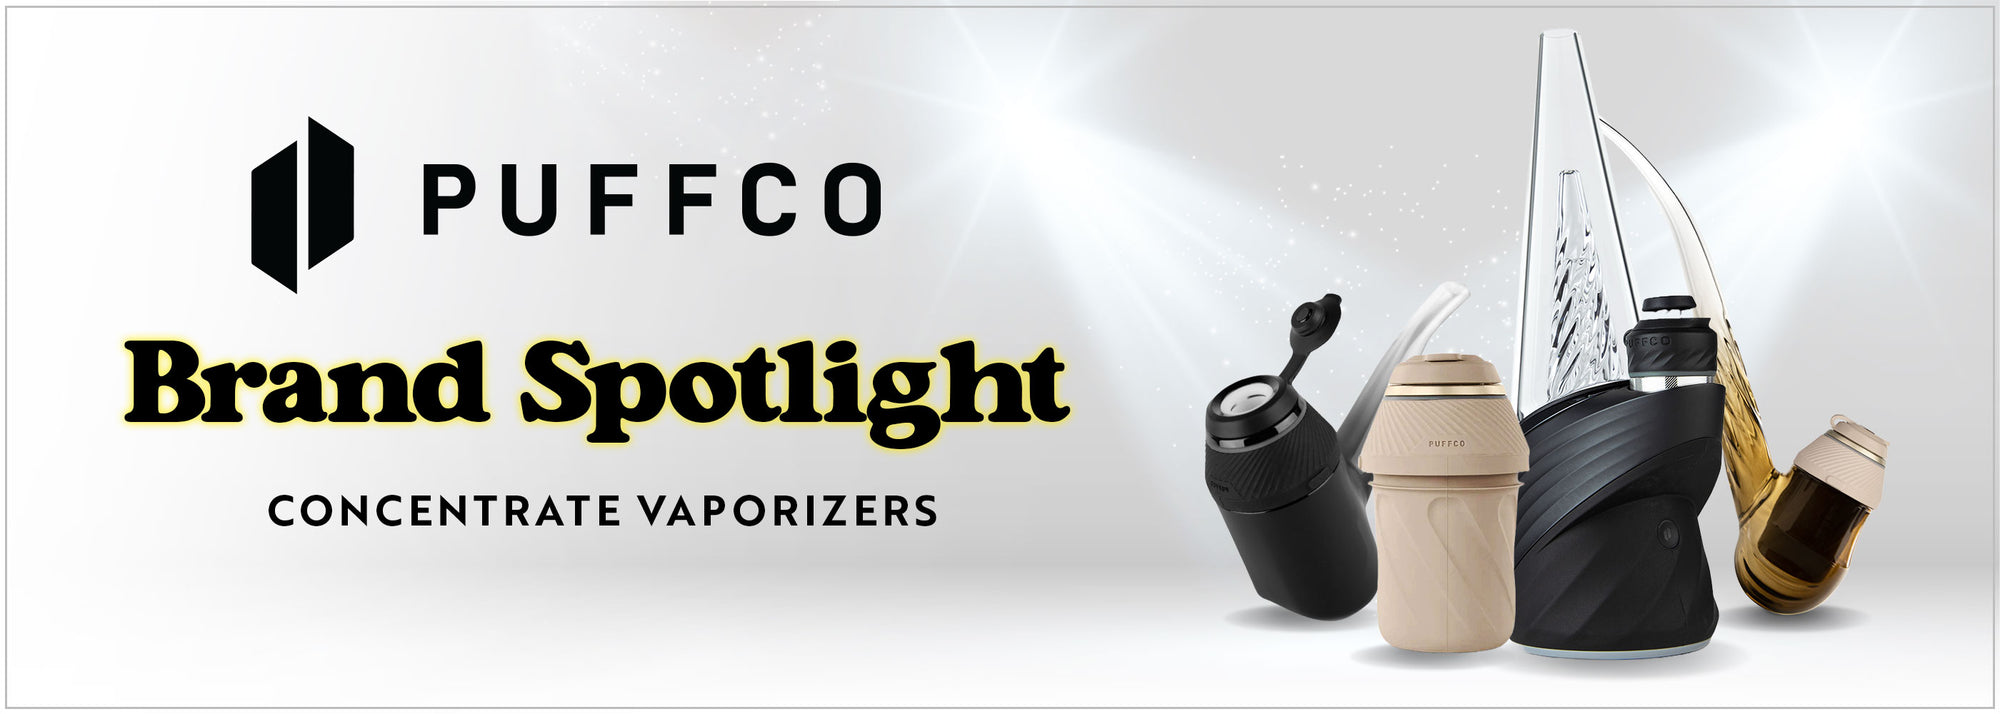 Brand Spotlight: PuffCo Concentrate Vaporizers  | PuffCo Dry Herp Vaporizers  - Wick and Wire Co, Melbourne Australia